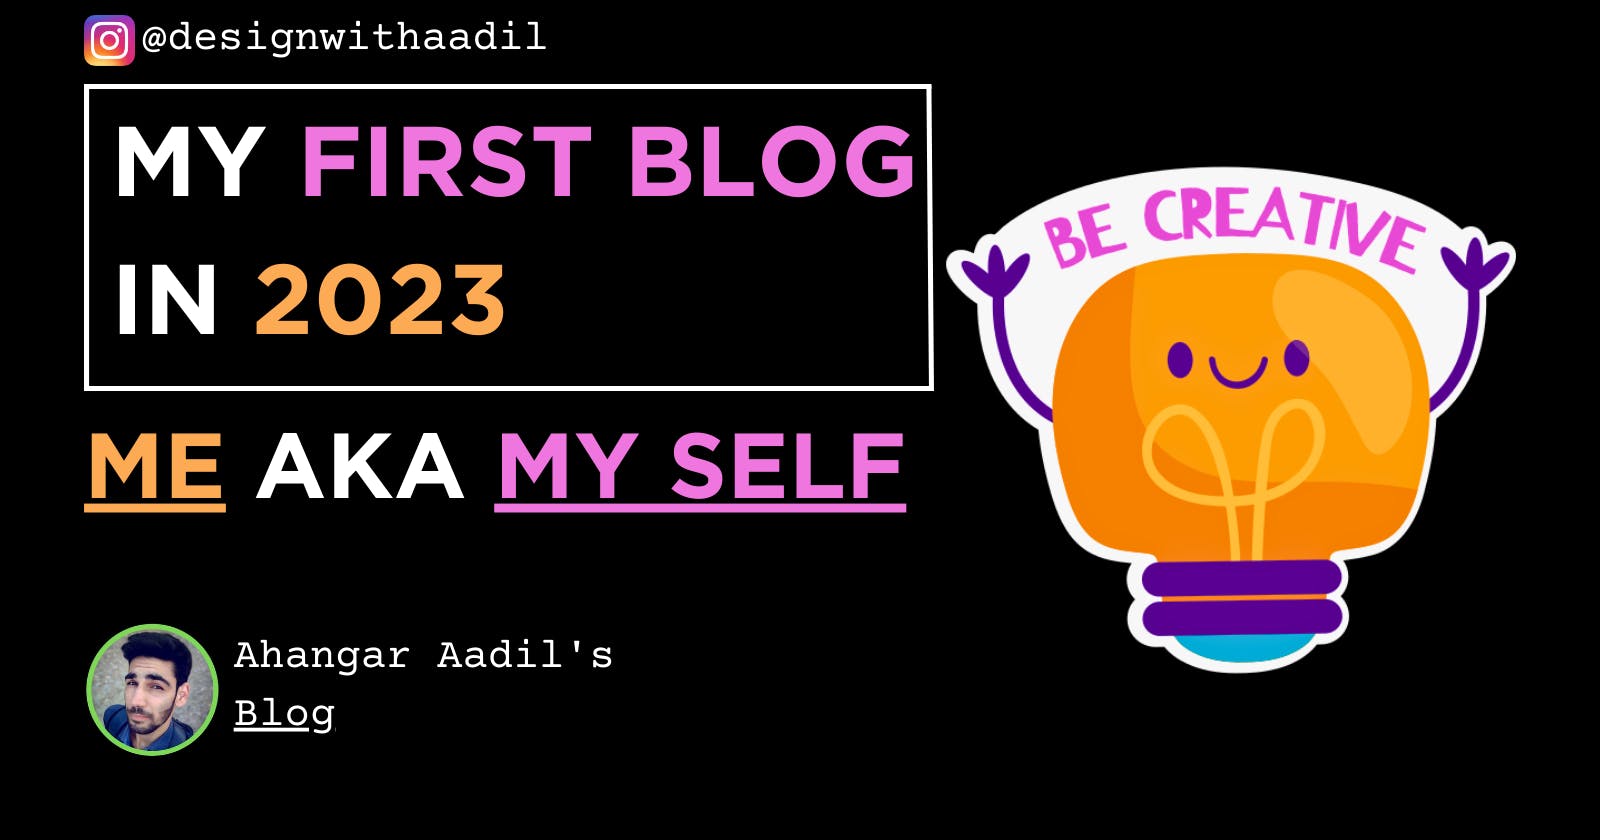 My First Blog in 2023